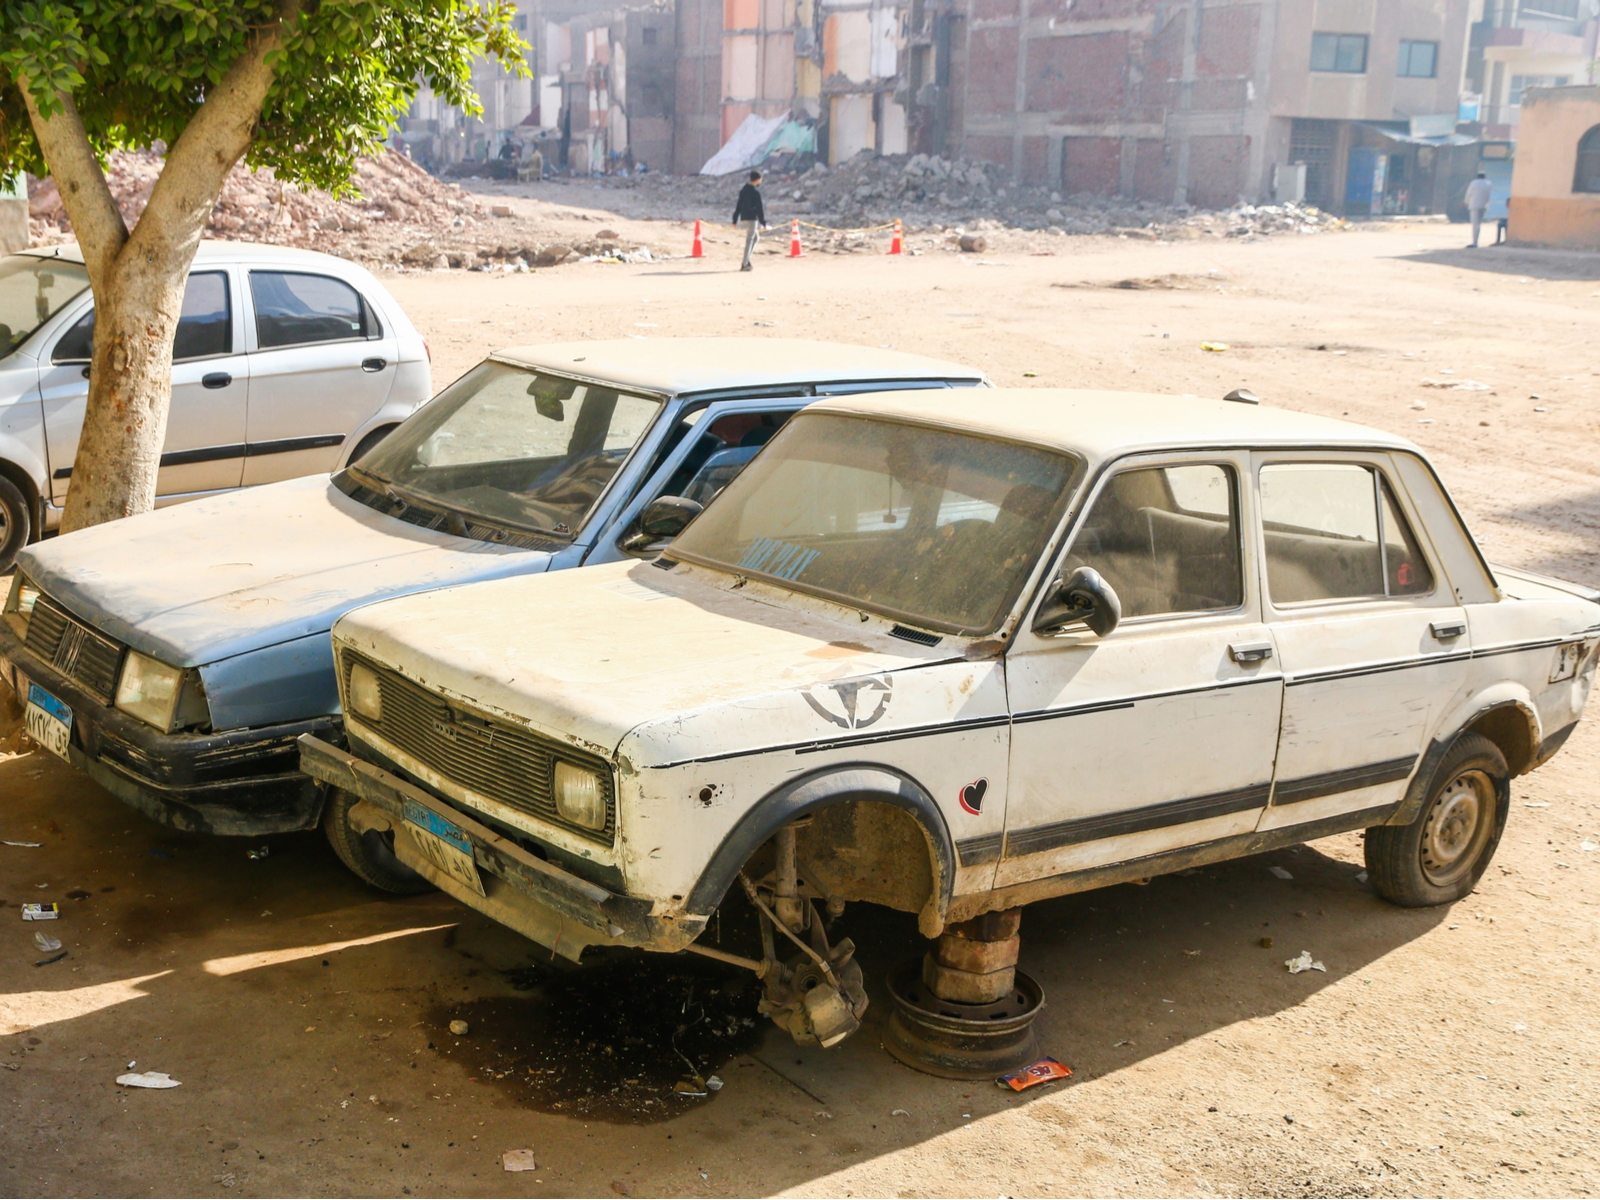 Disassembled car in on blocks in the street for a section on is Egypt safe and how to avoid bad neighborhoods